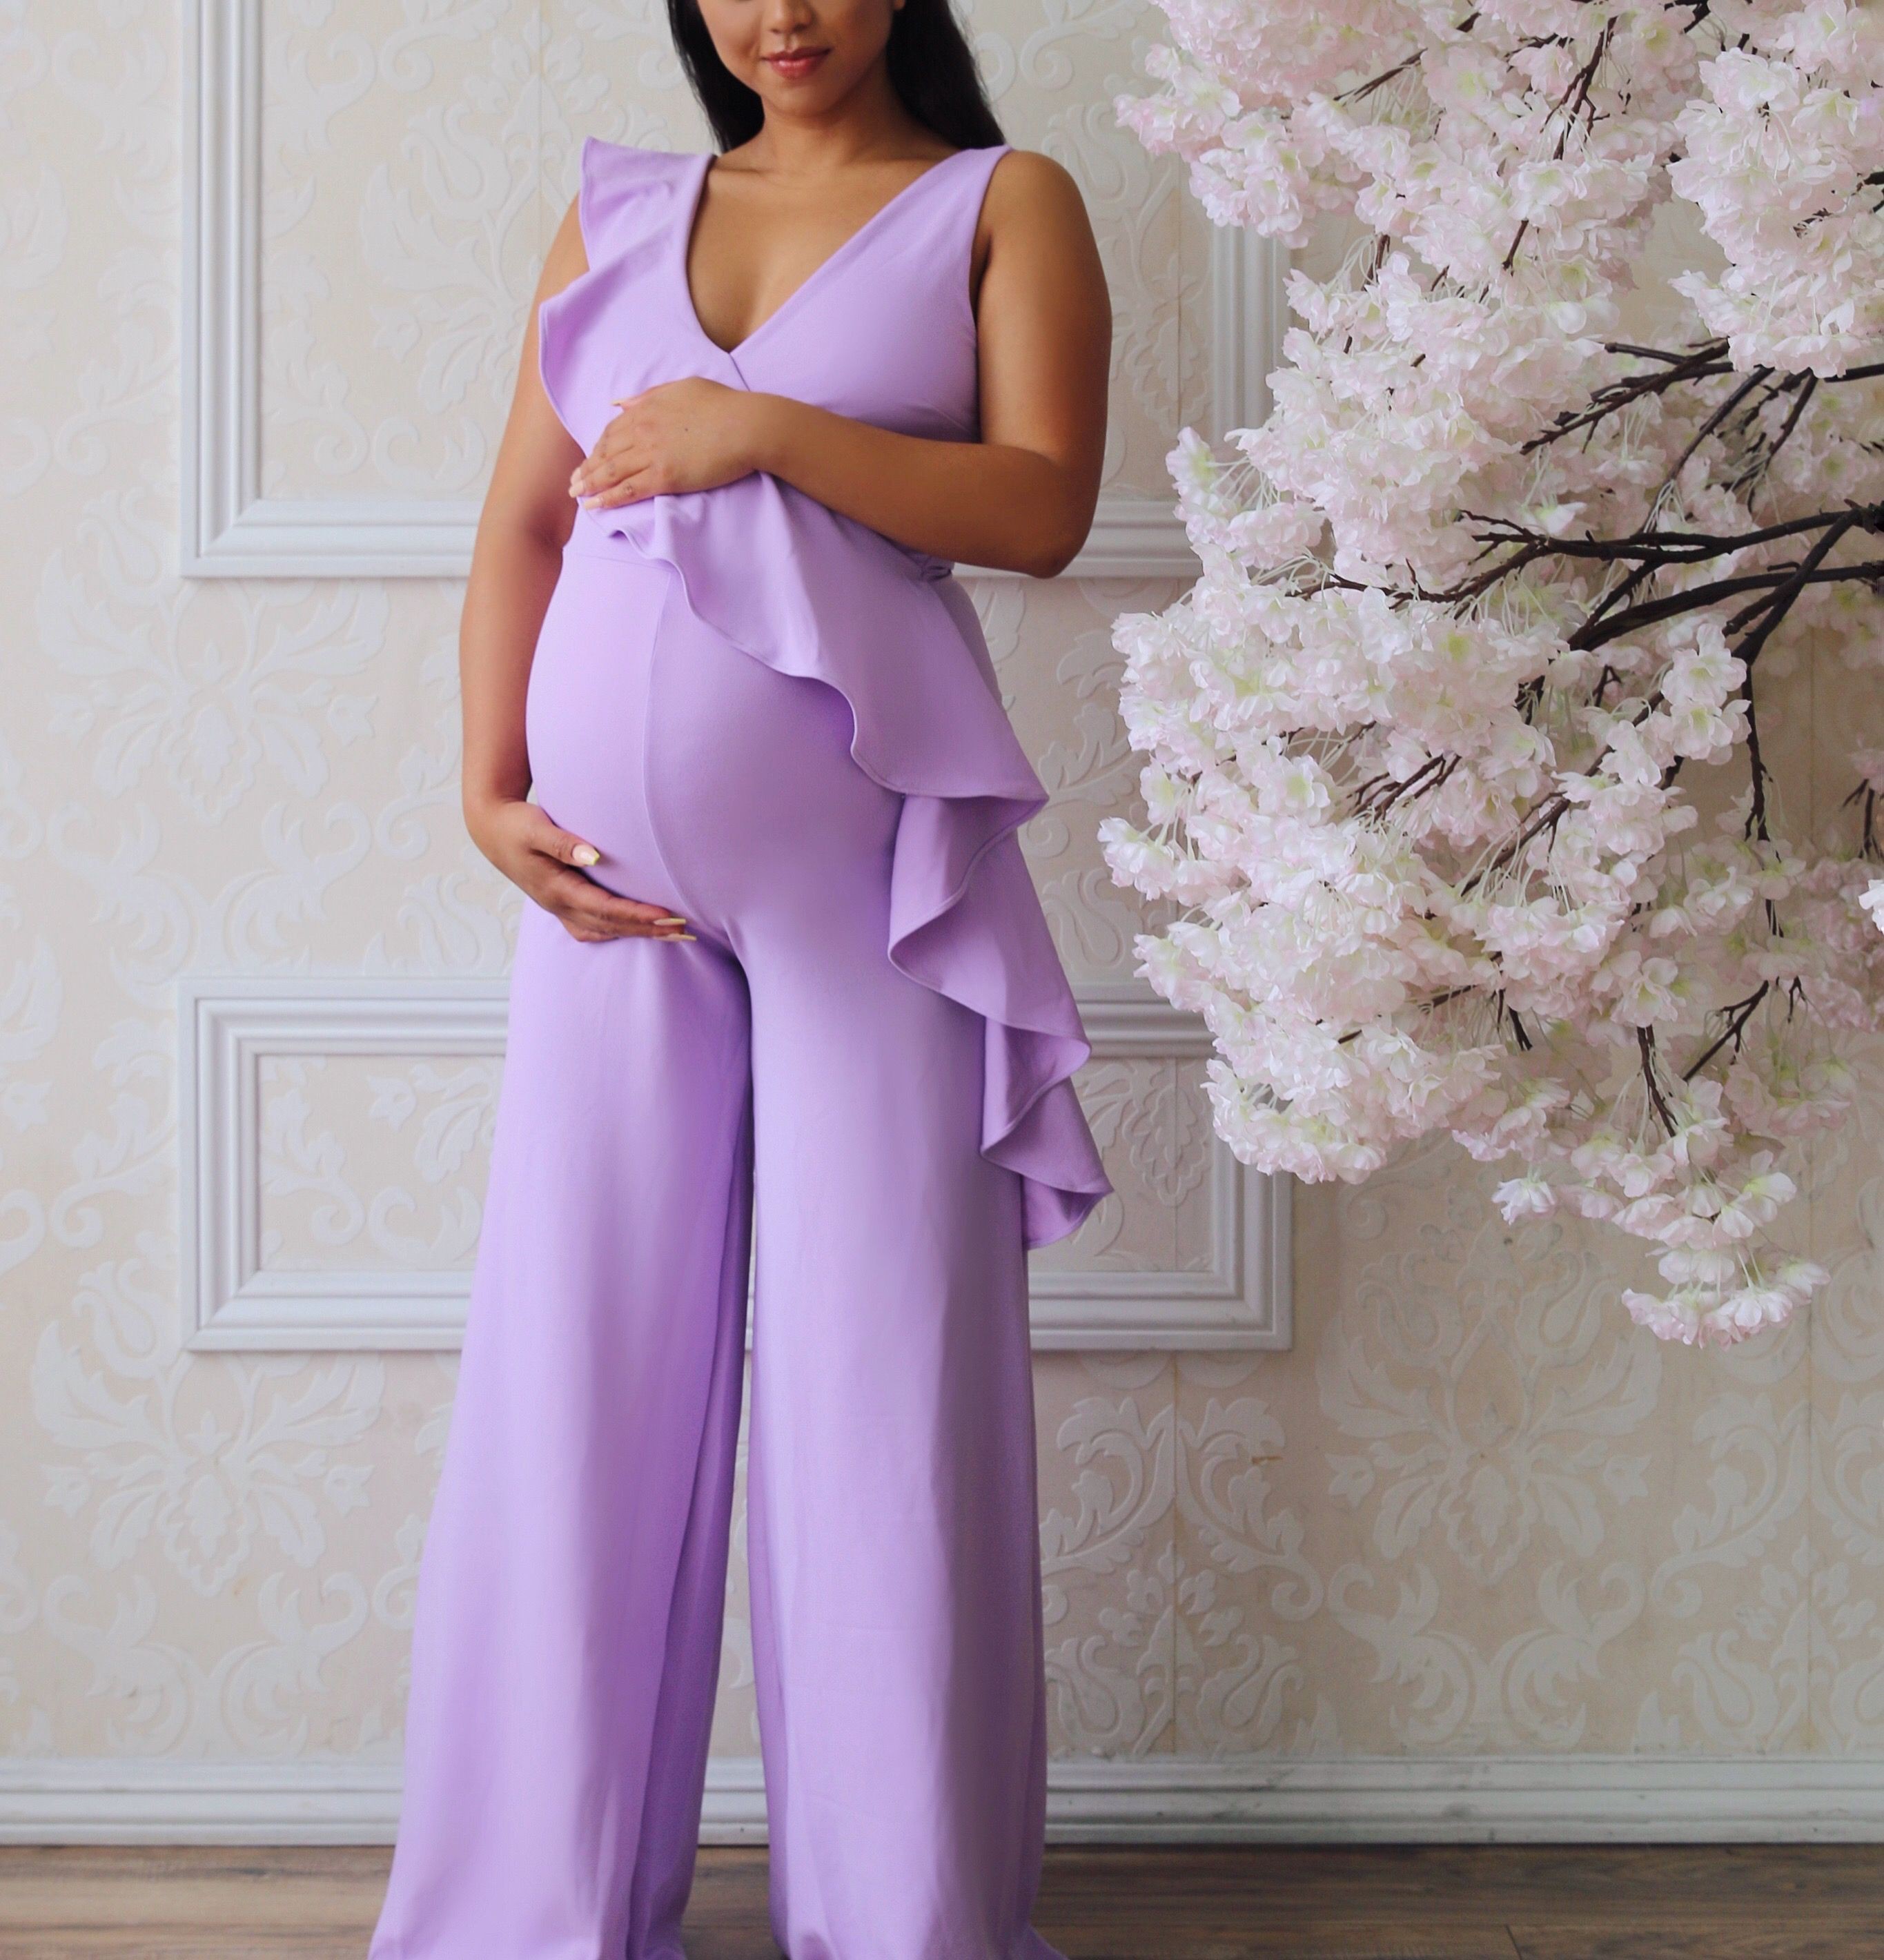 Outfit Ideas For Pregnant Ladies - Maternity Outfits, Gender revela party y Maternity clothing